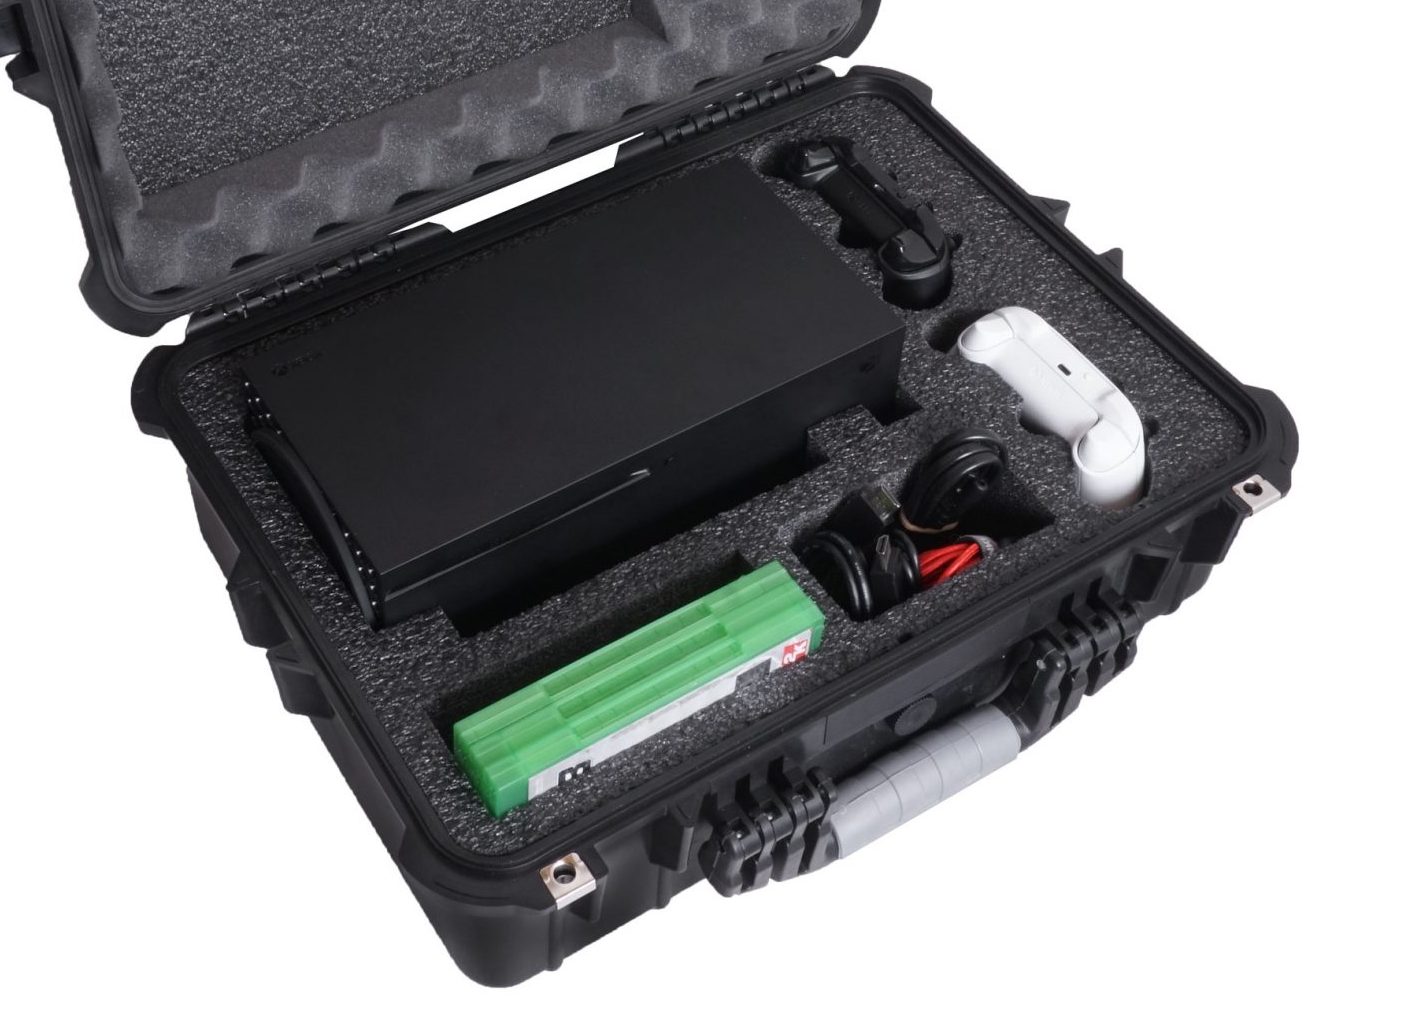 xbox carrying case with screen